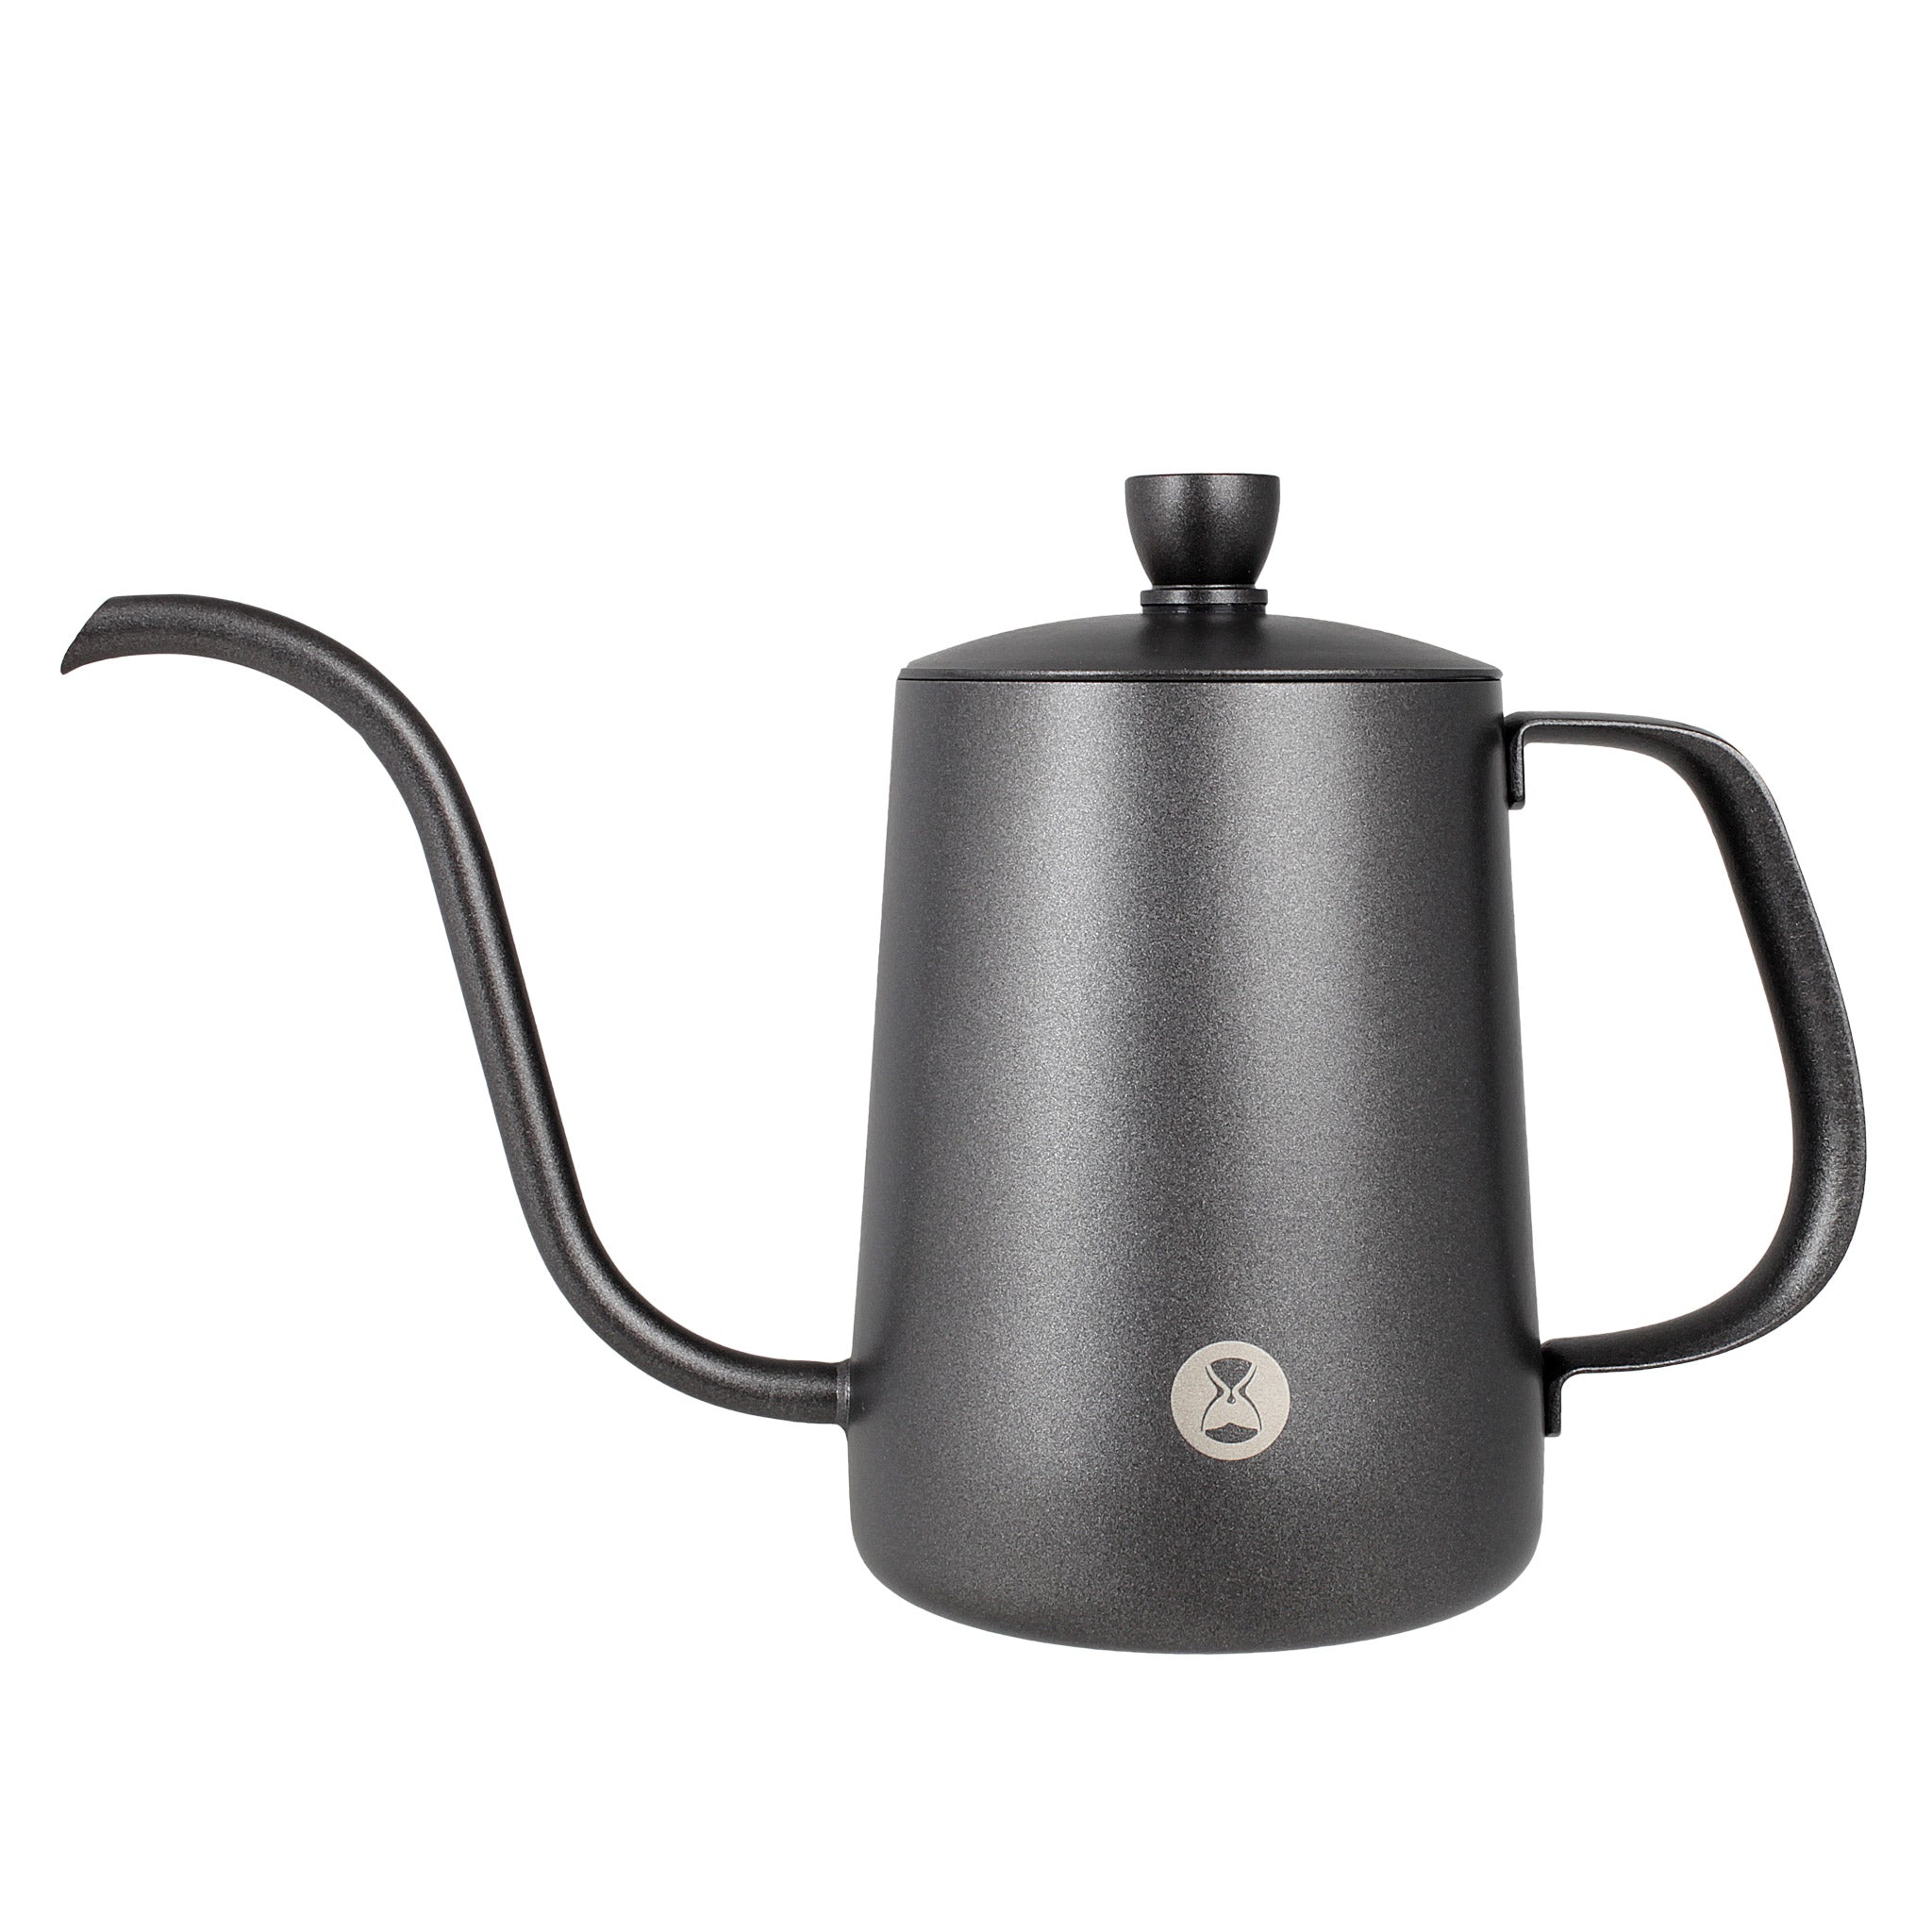 Inexpensive Excellence timemore kettle